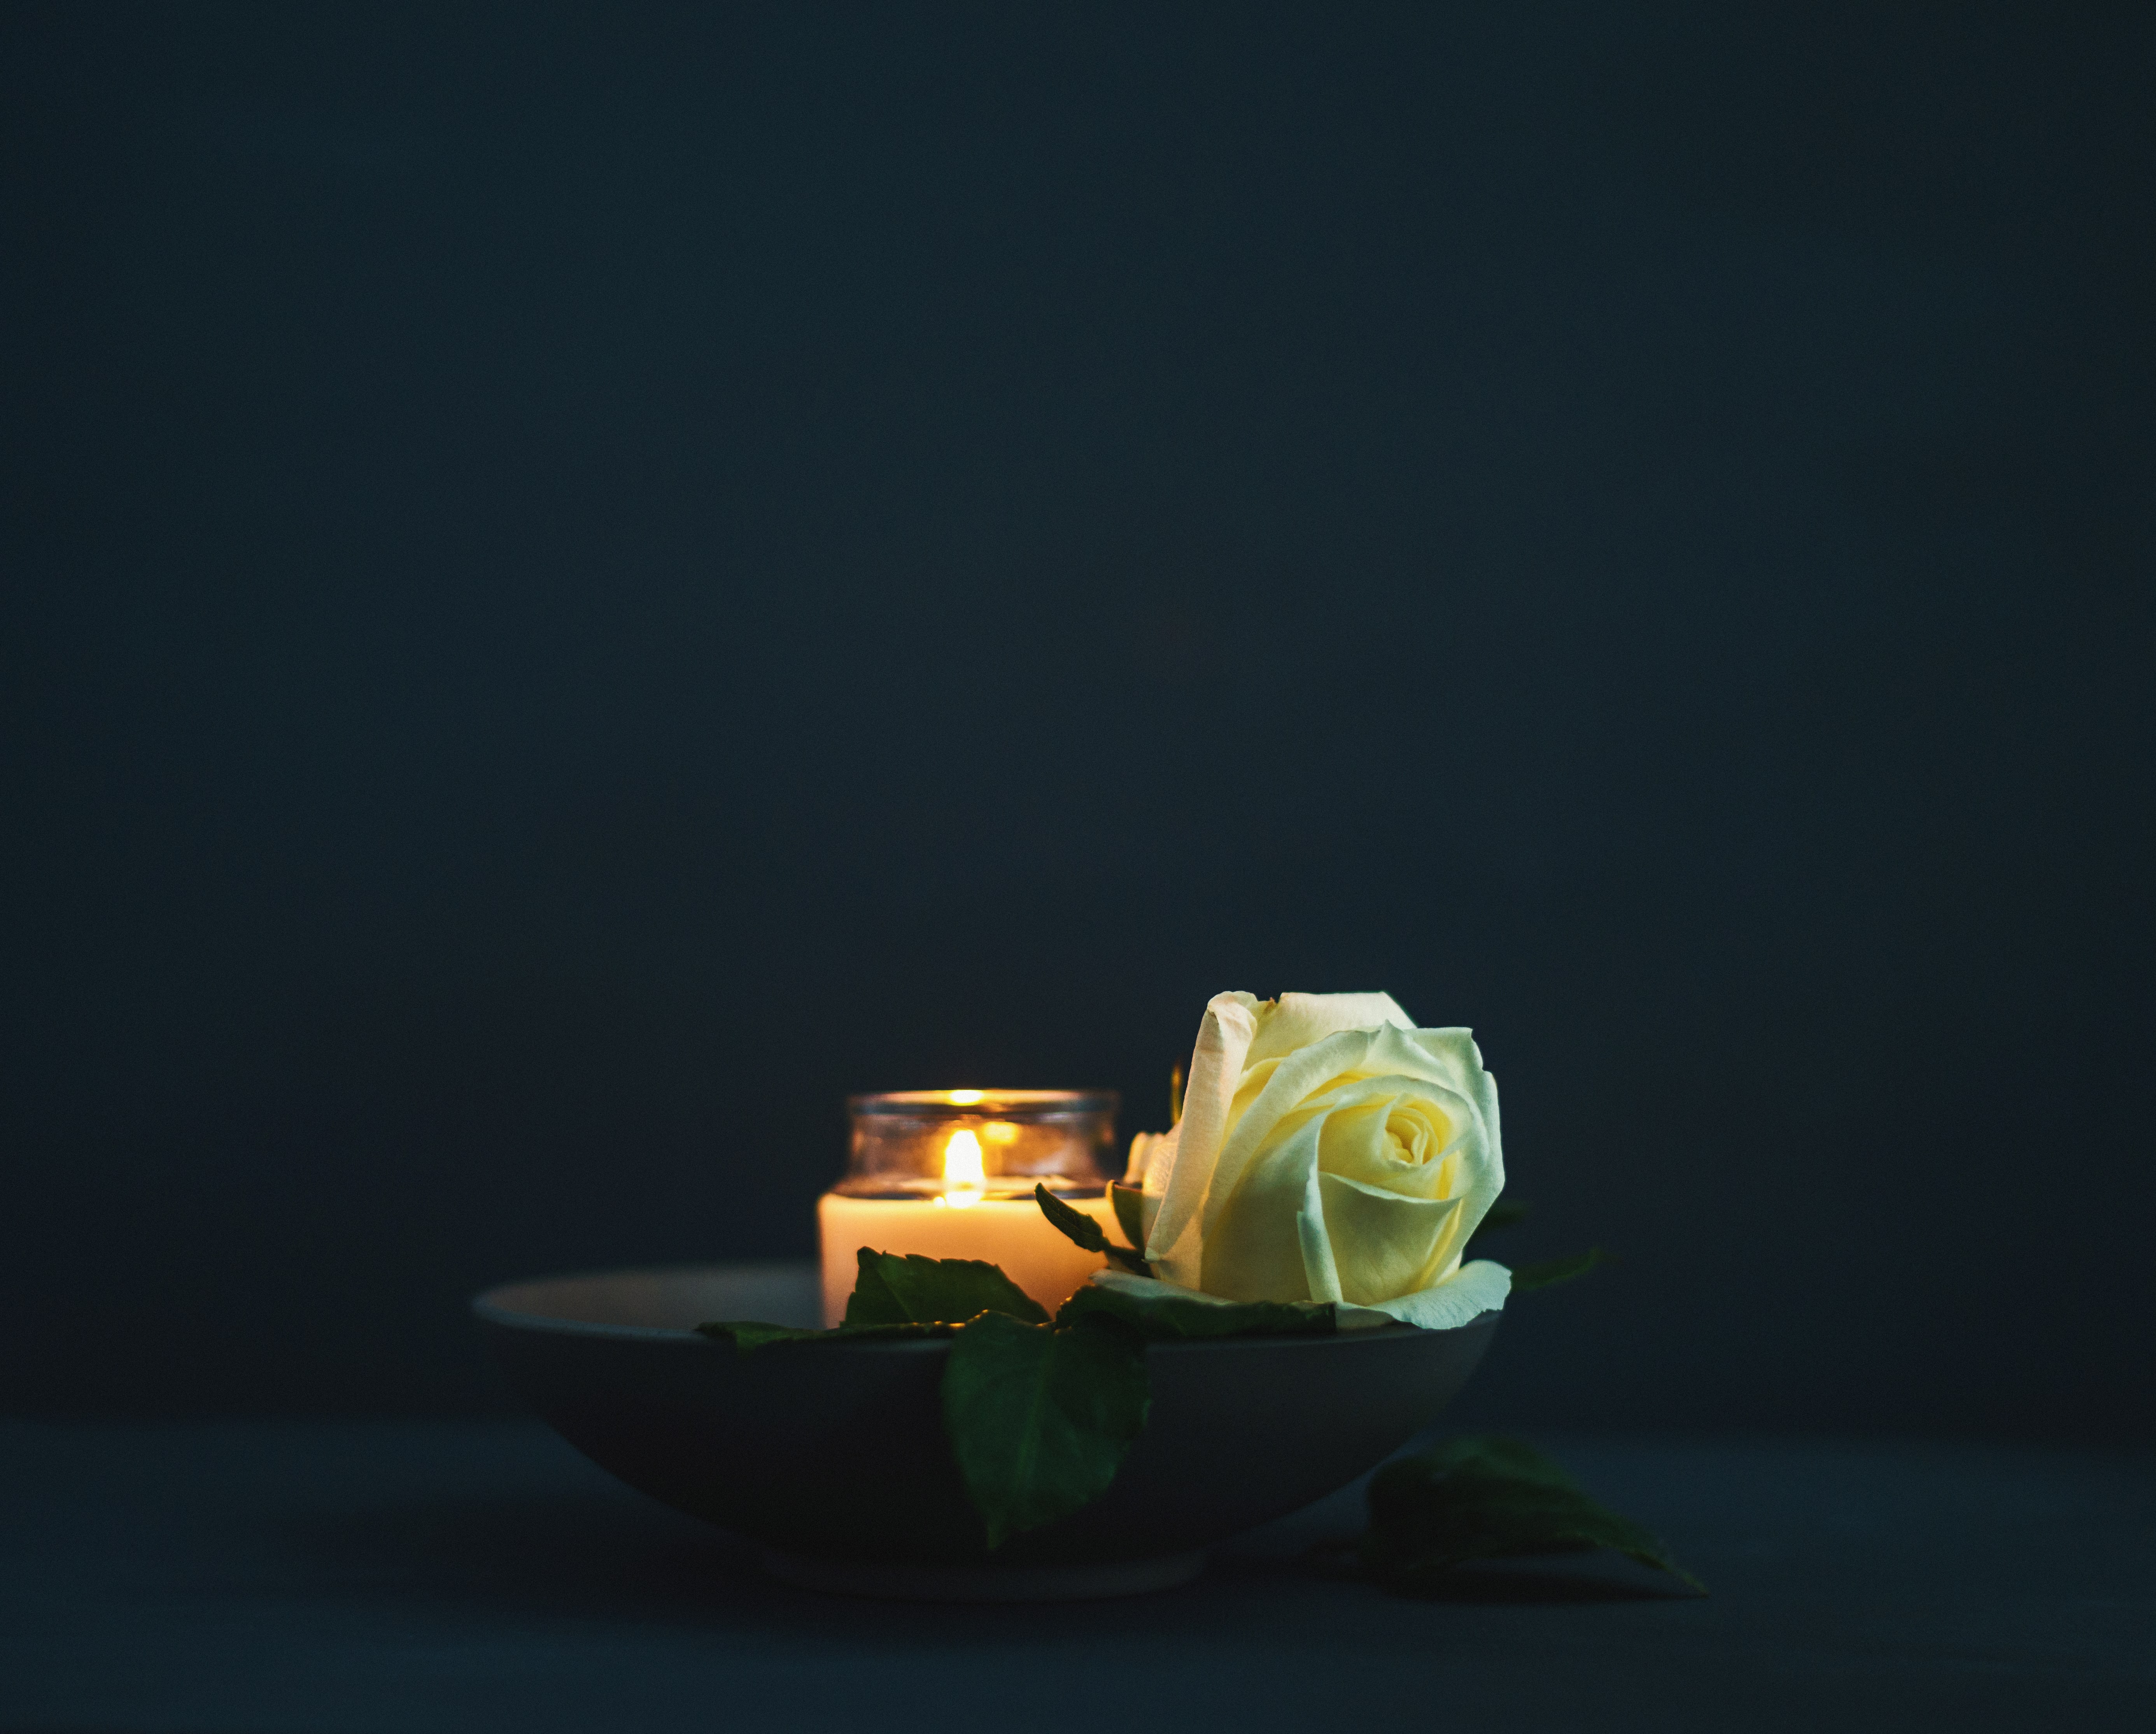 white rose next to a single lit candle